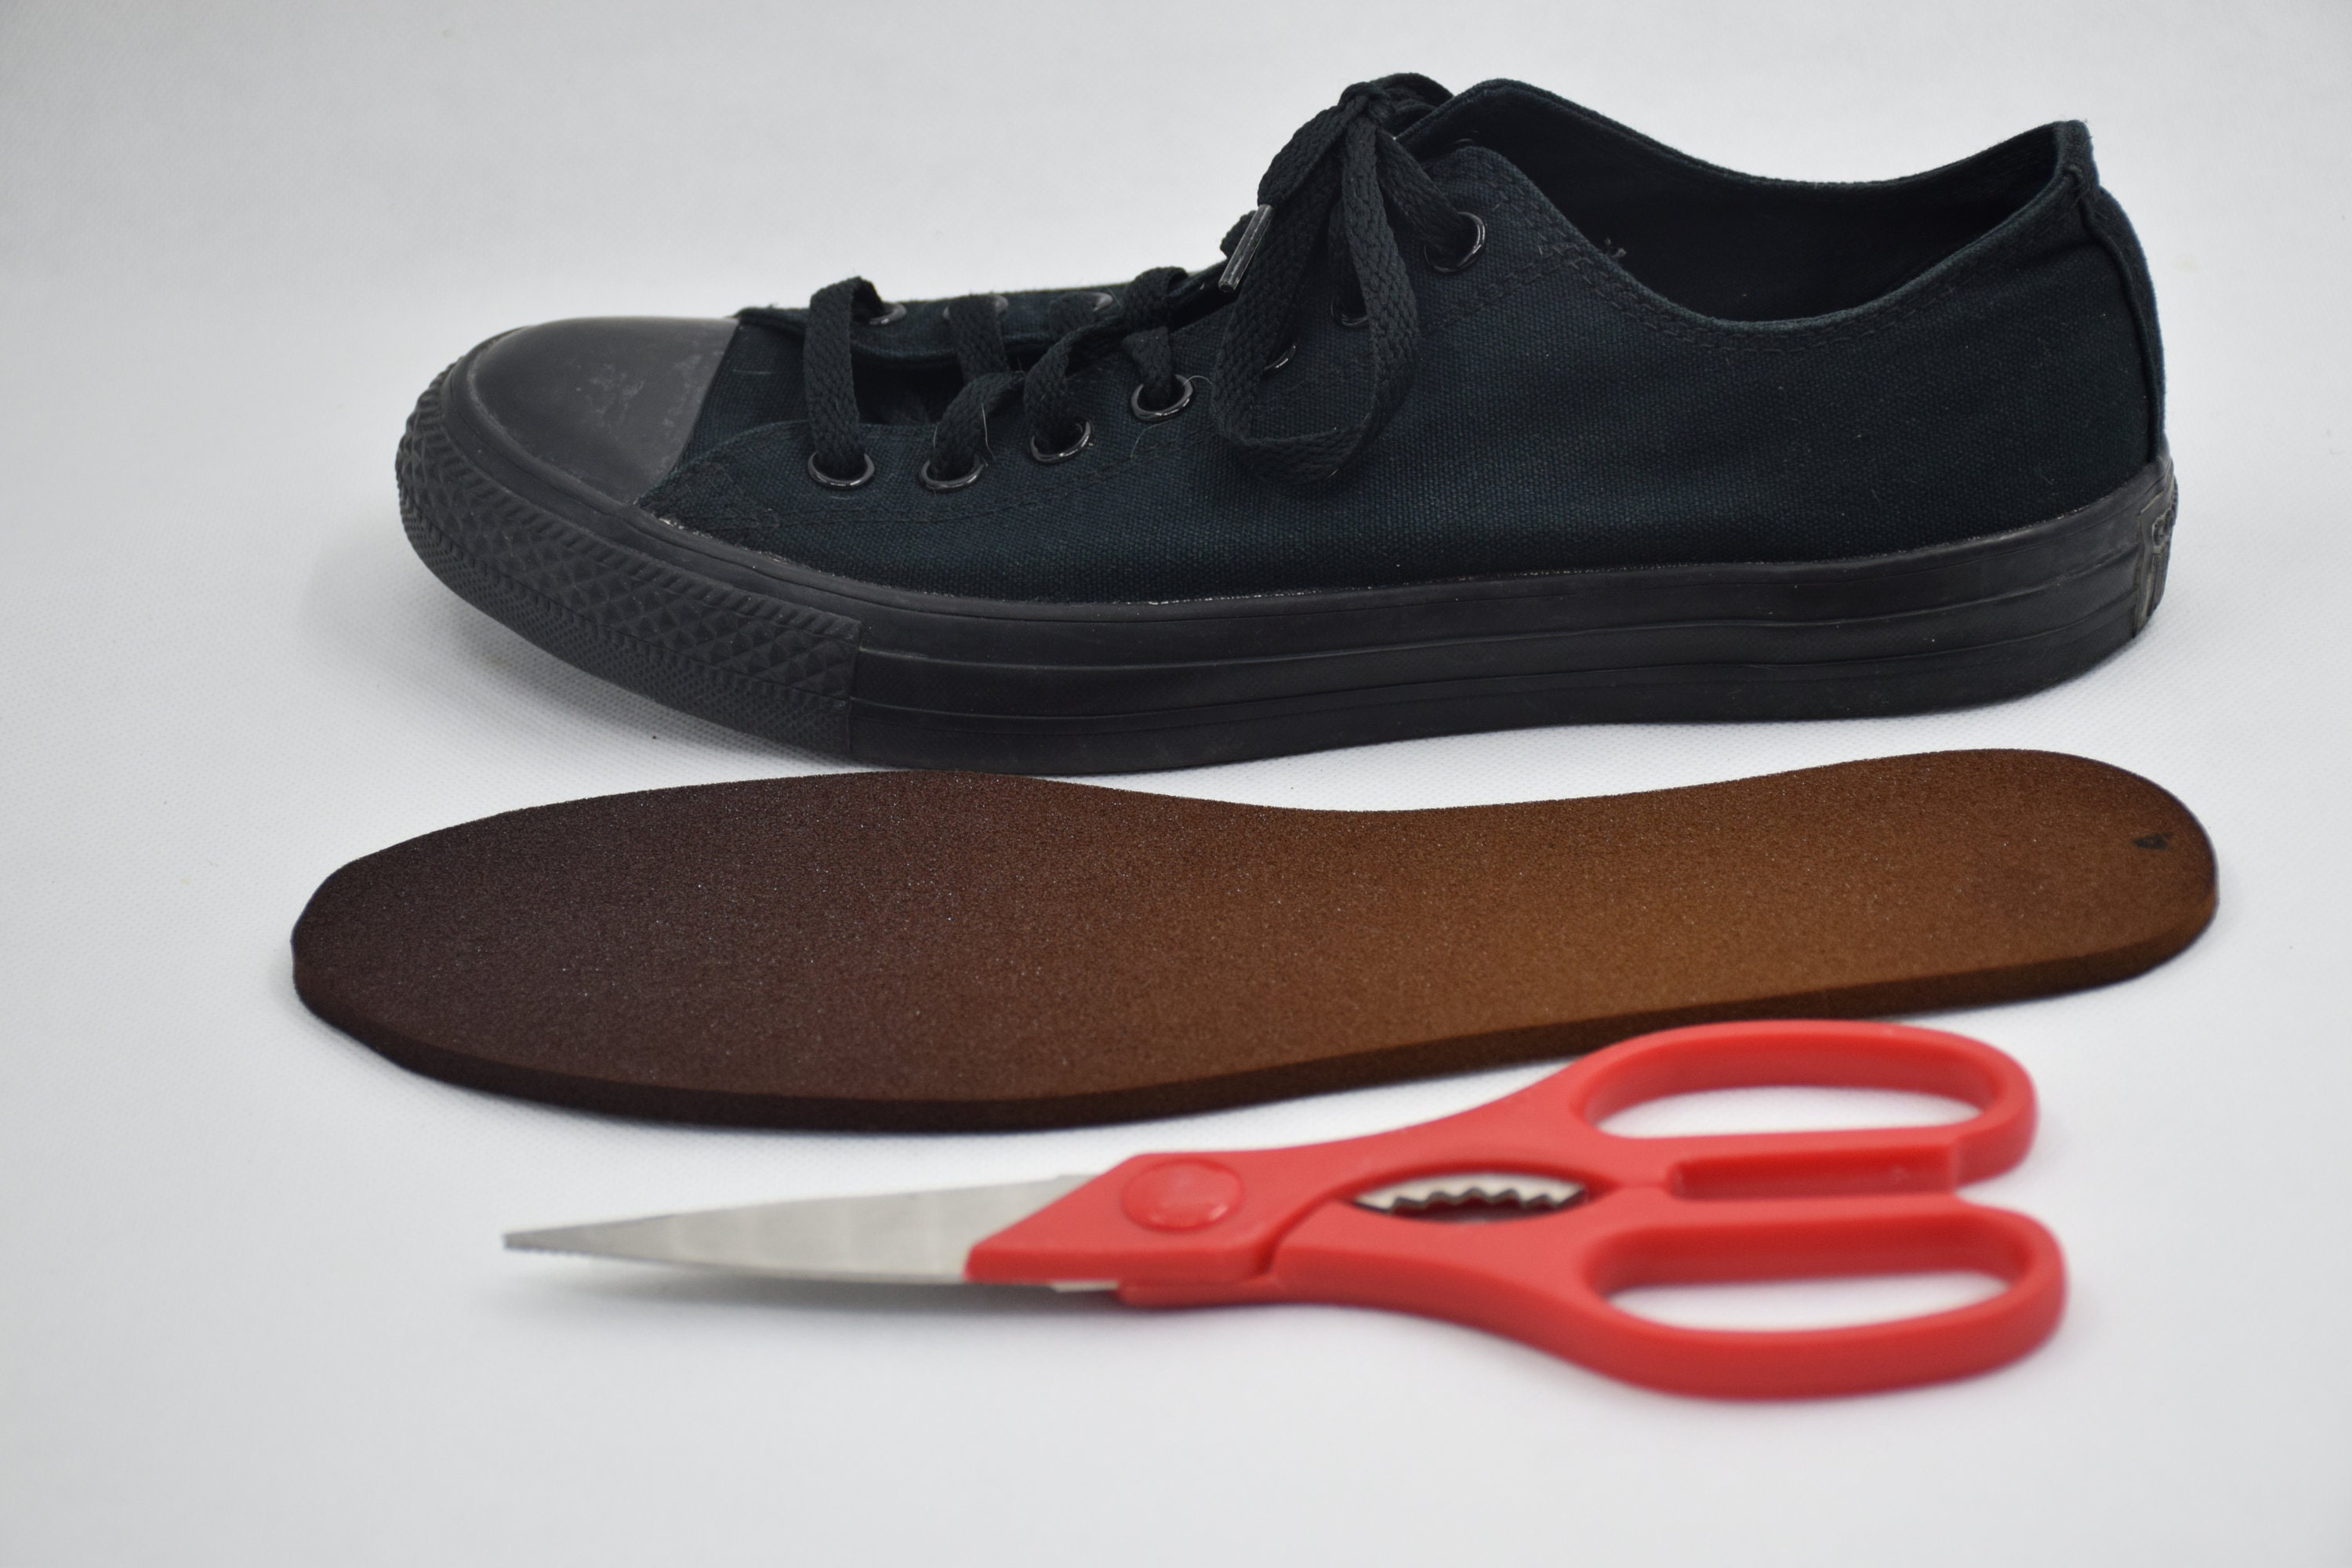 PODOPHYLUS Antimicrobial Insoles That Fight Diabetic Foot and Smelly ...